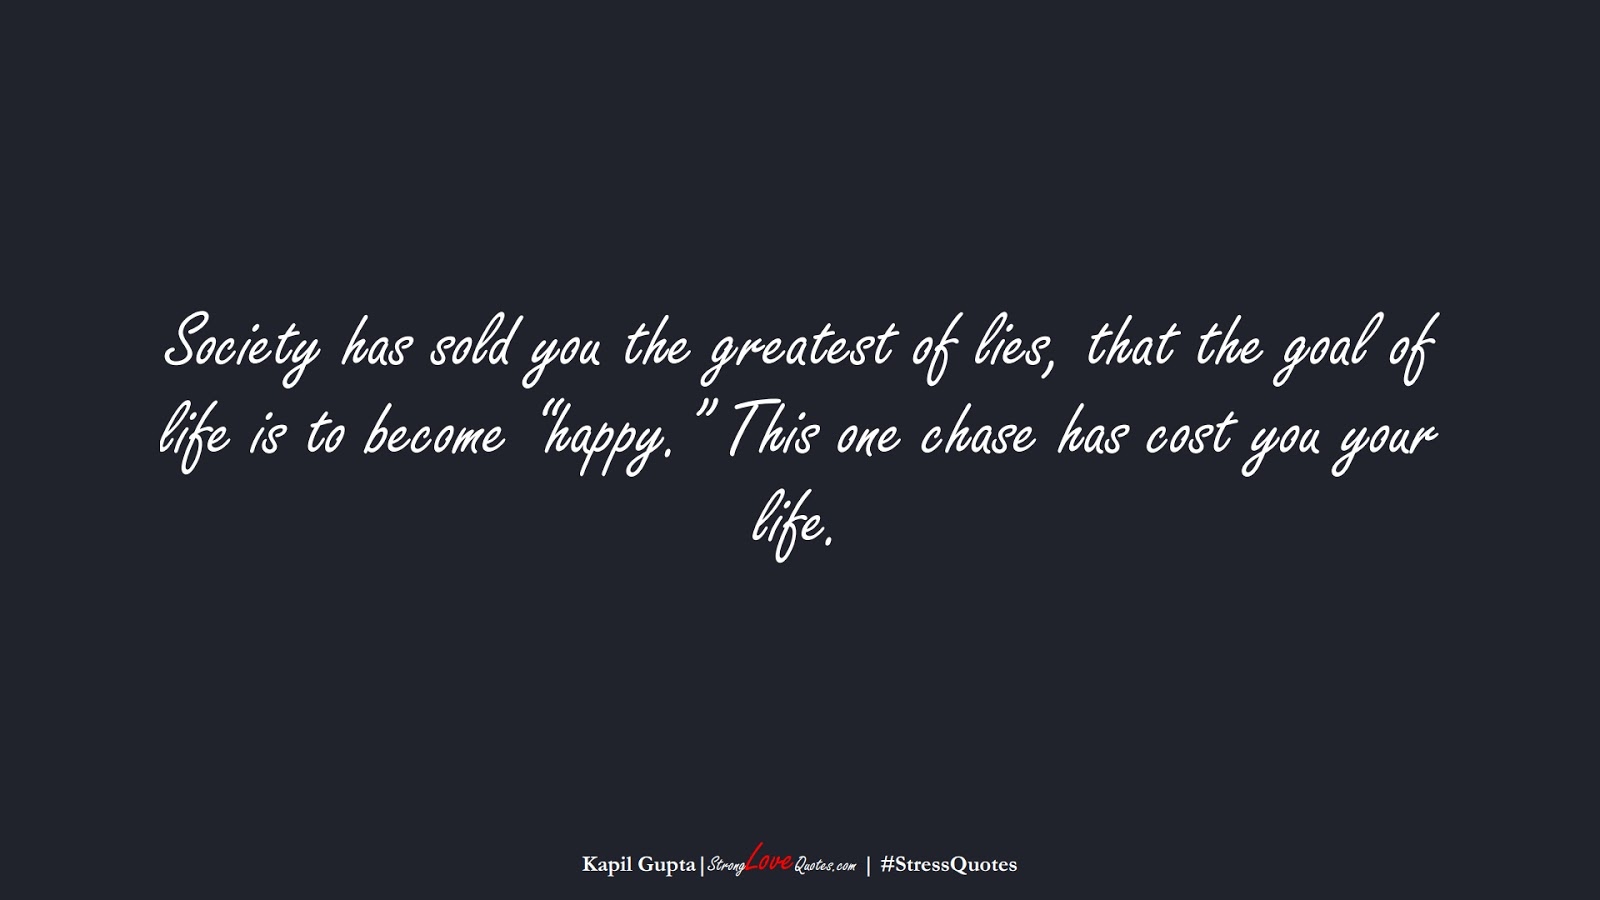 Society has sold you the greatest of lies, that the goal of life is to become “happy.” This one chase has cost you your life. (Kapil Gupta);  #StressQuotes